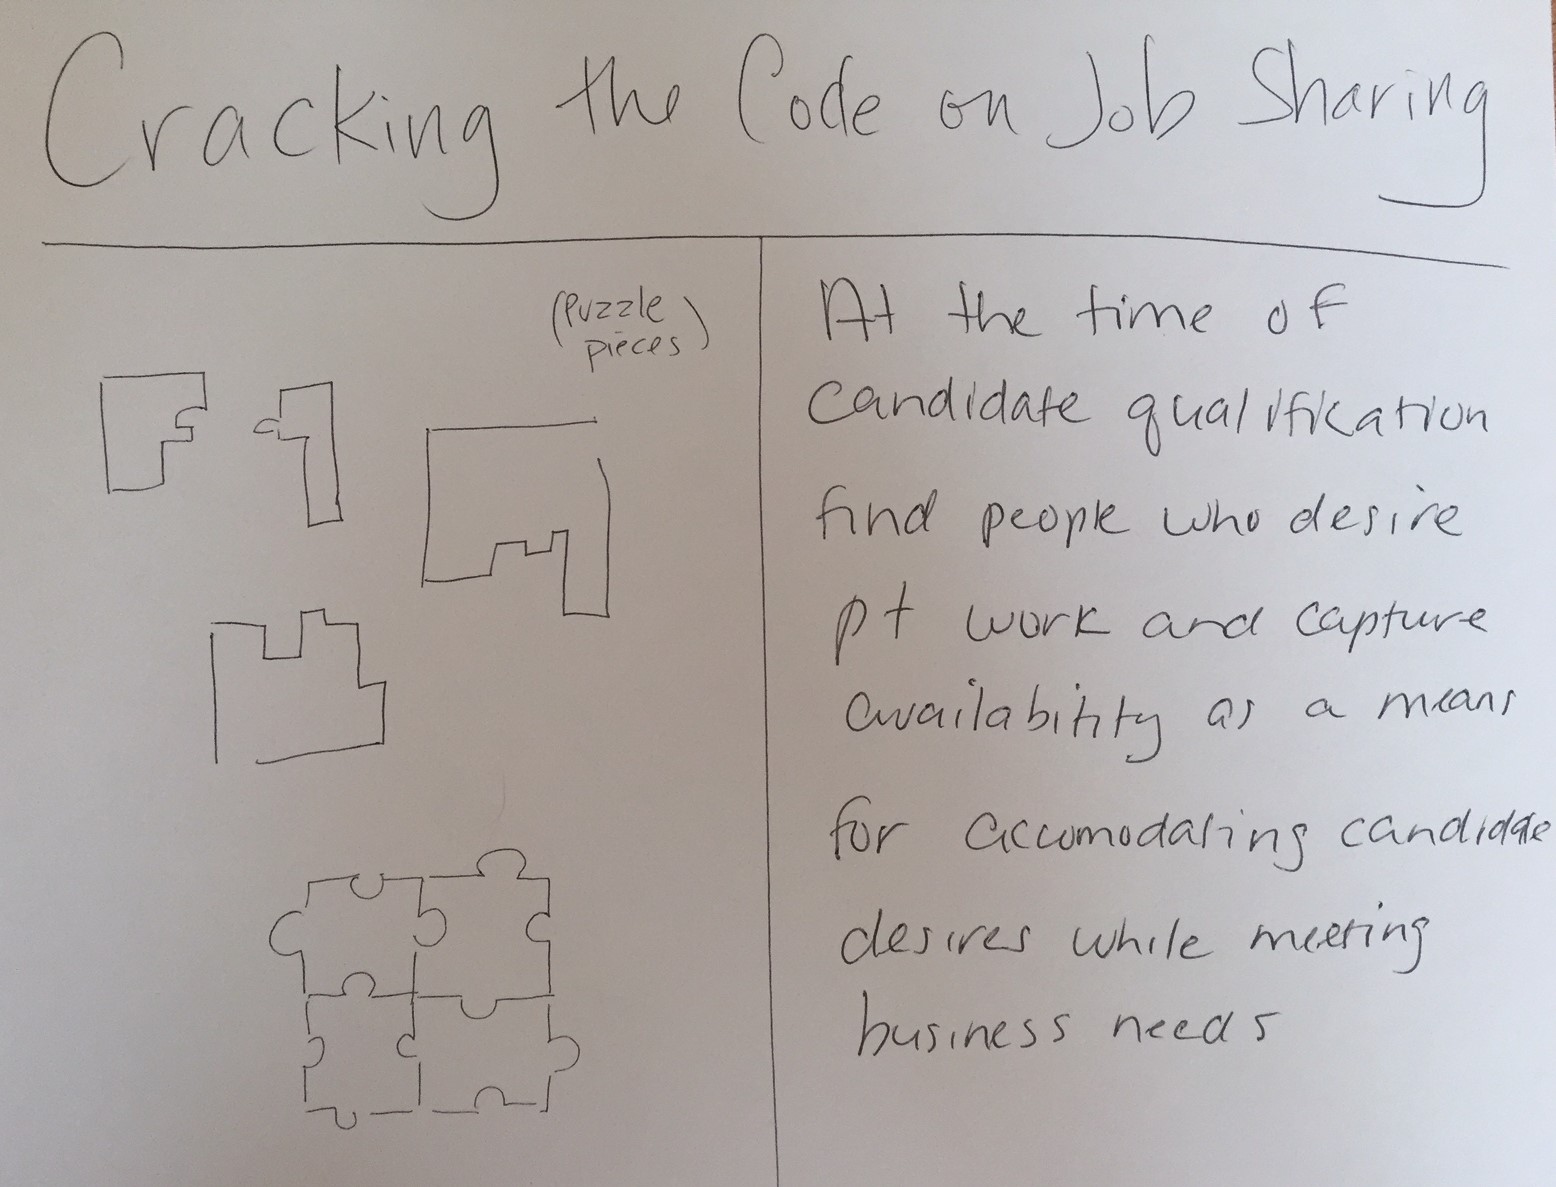 CRACKING THE CODE ON JOB SHARING